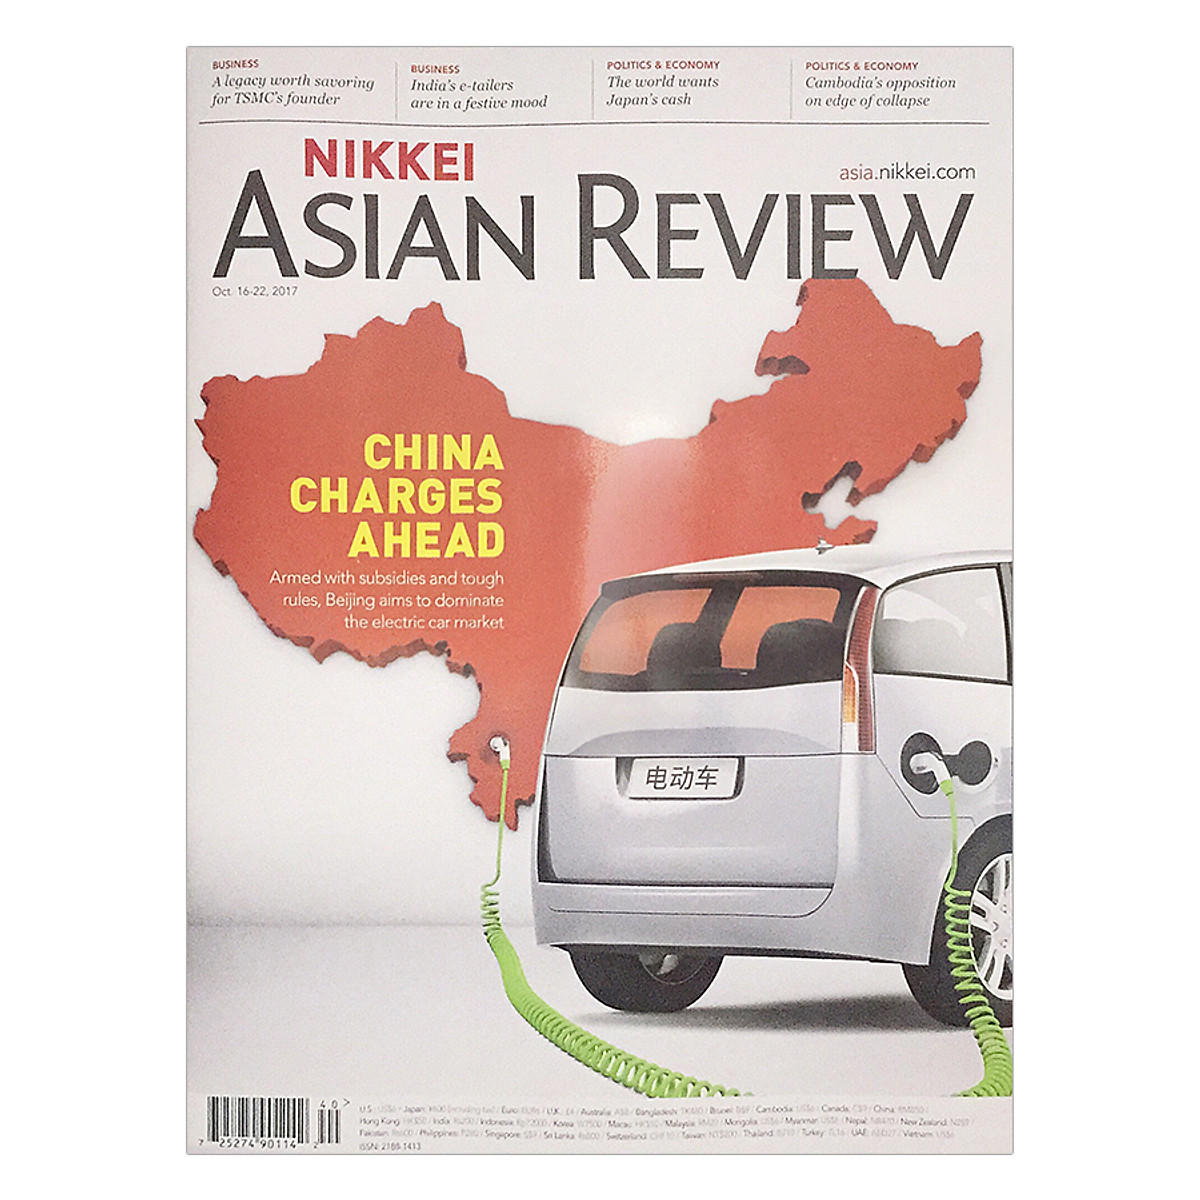 Nikkei Asian Review: China Charges A Head - 40